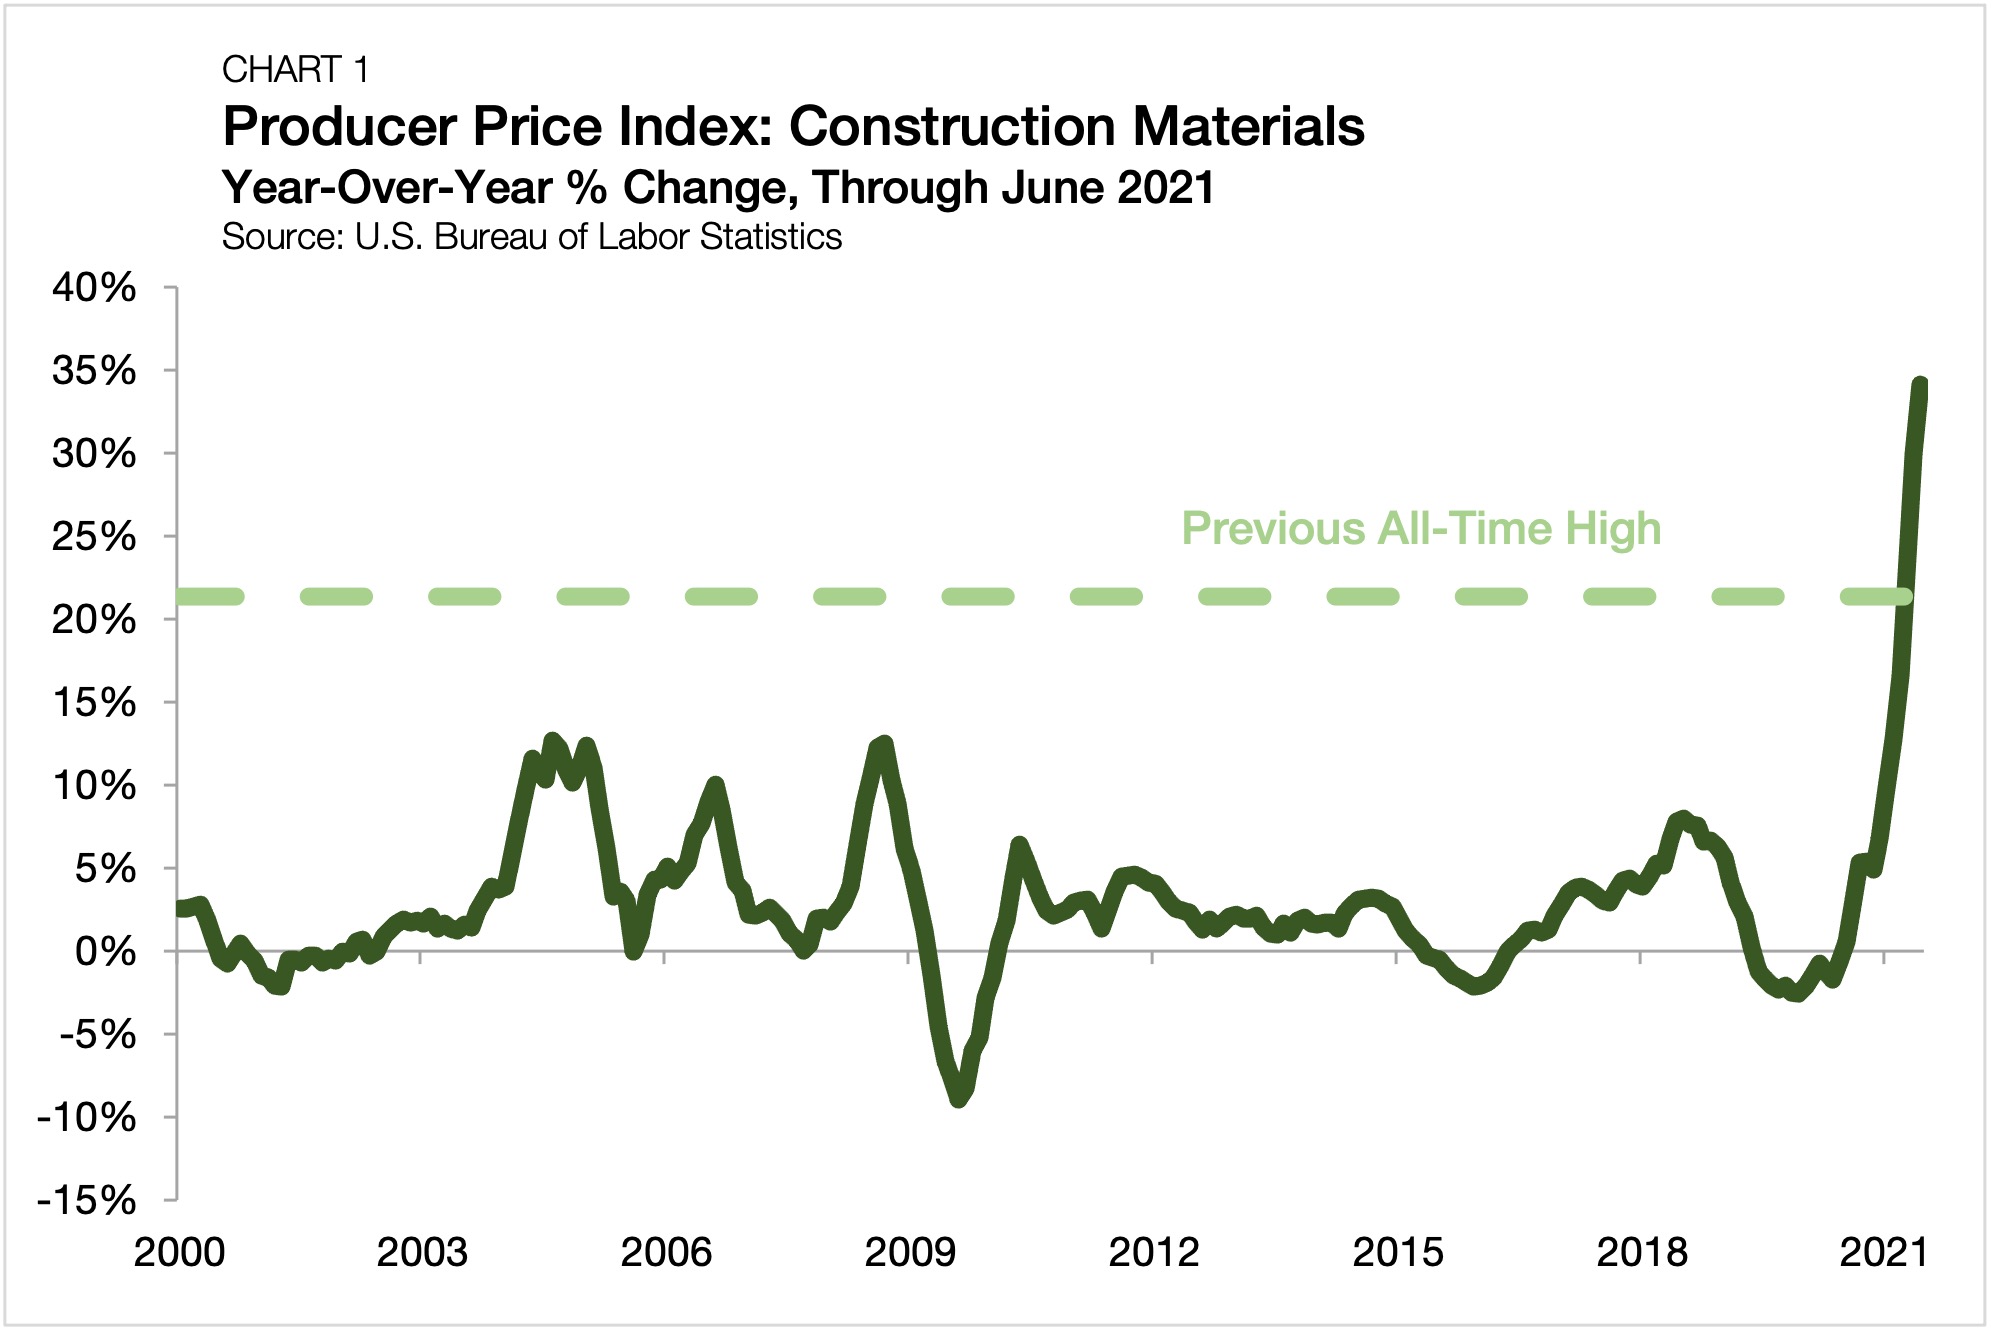 How Are Elevated Construction Costs Impacting Residential Development?